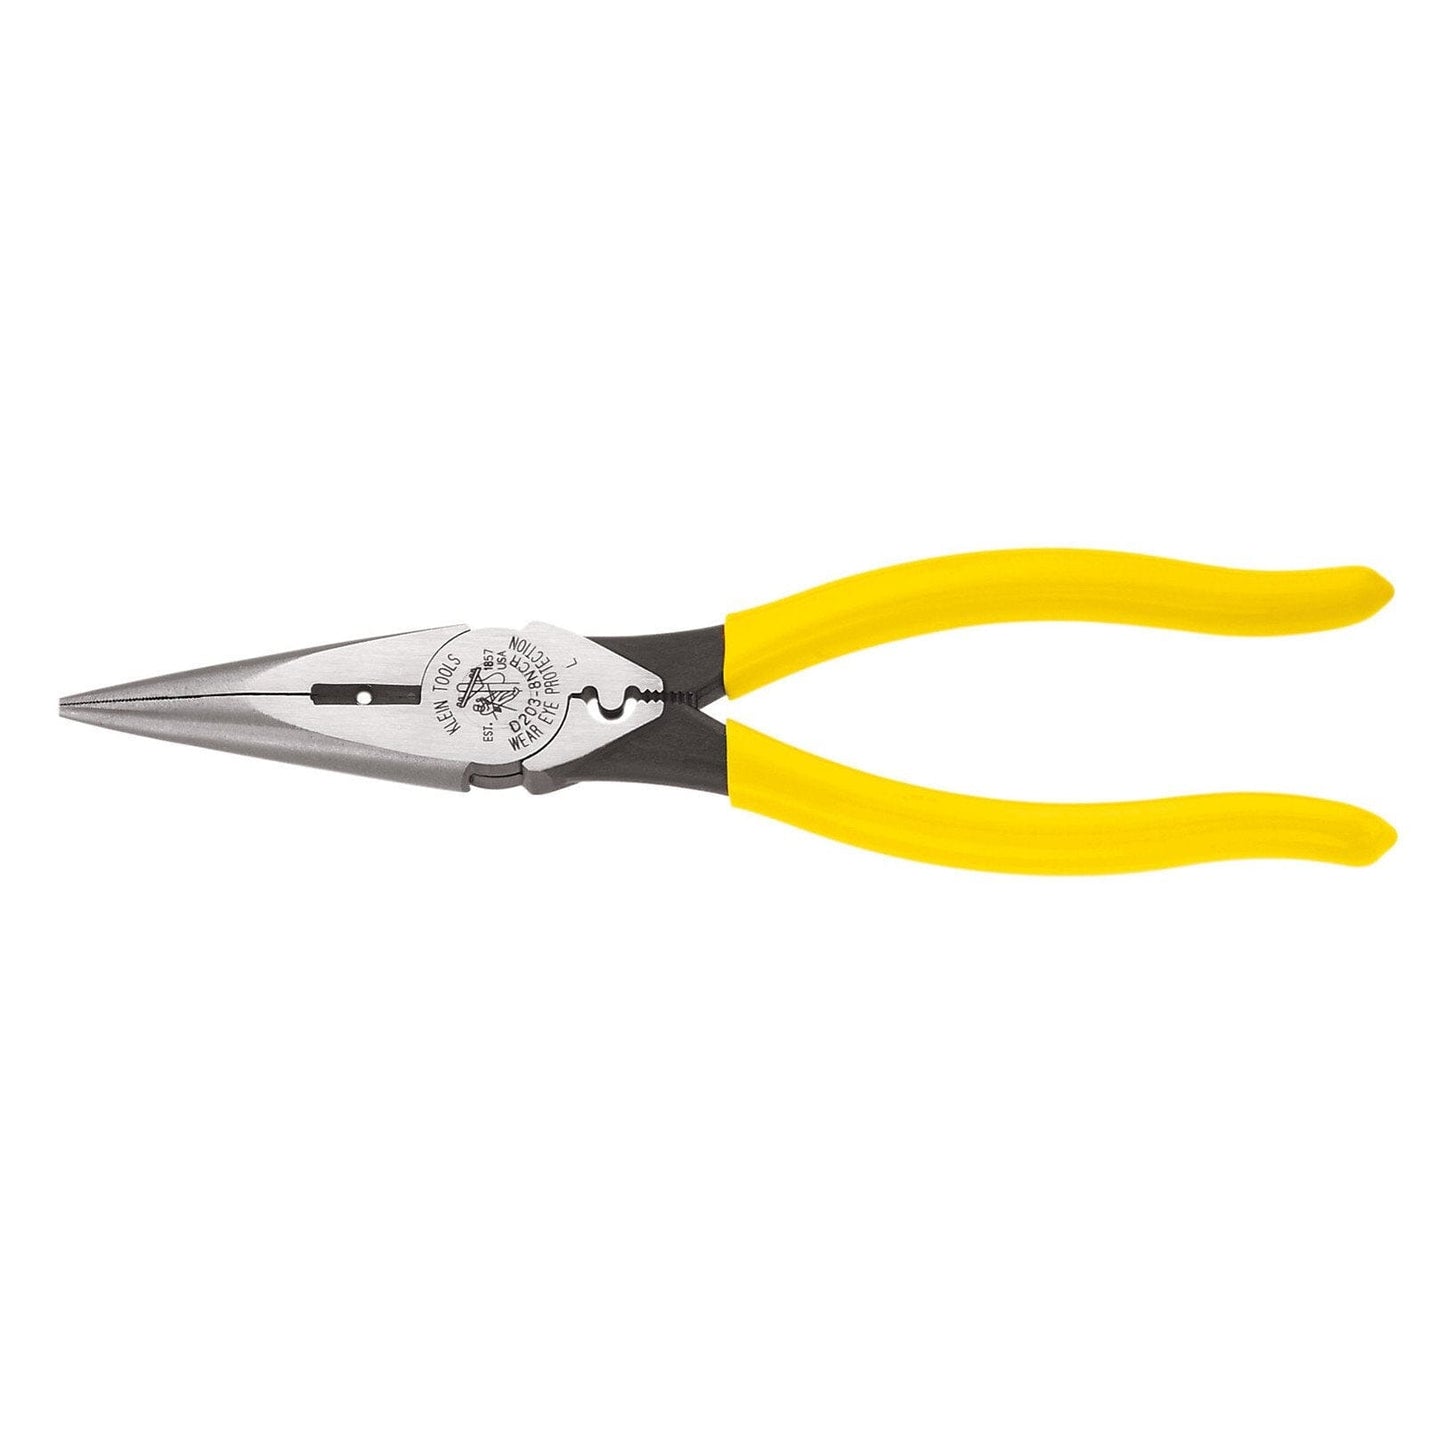 Klein 8'' Heavy-Duty Long-Nose Pliers - Side-Cutting, Wire Stripping & Crimping - D203-8NCR Pliers Klein Tools 